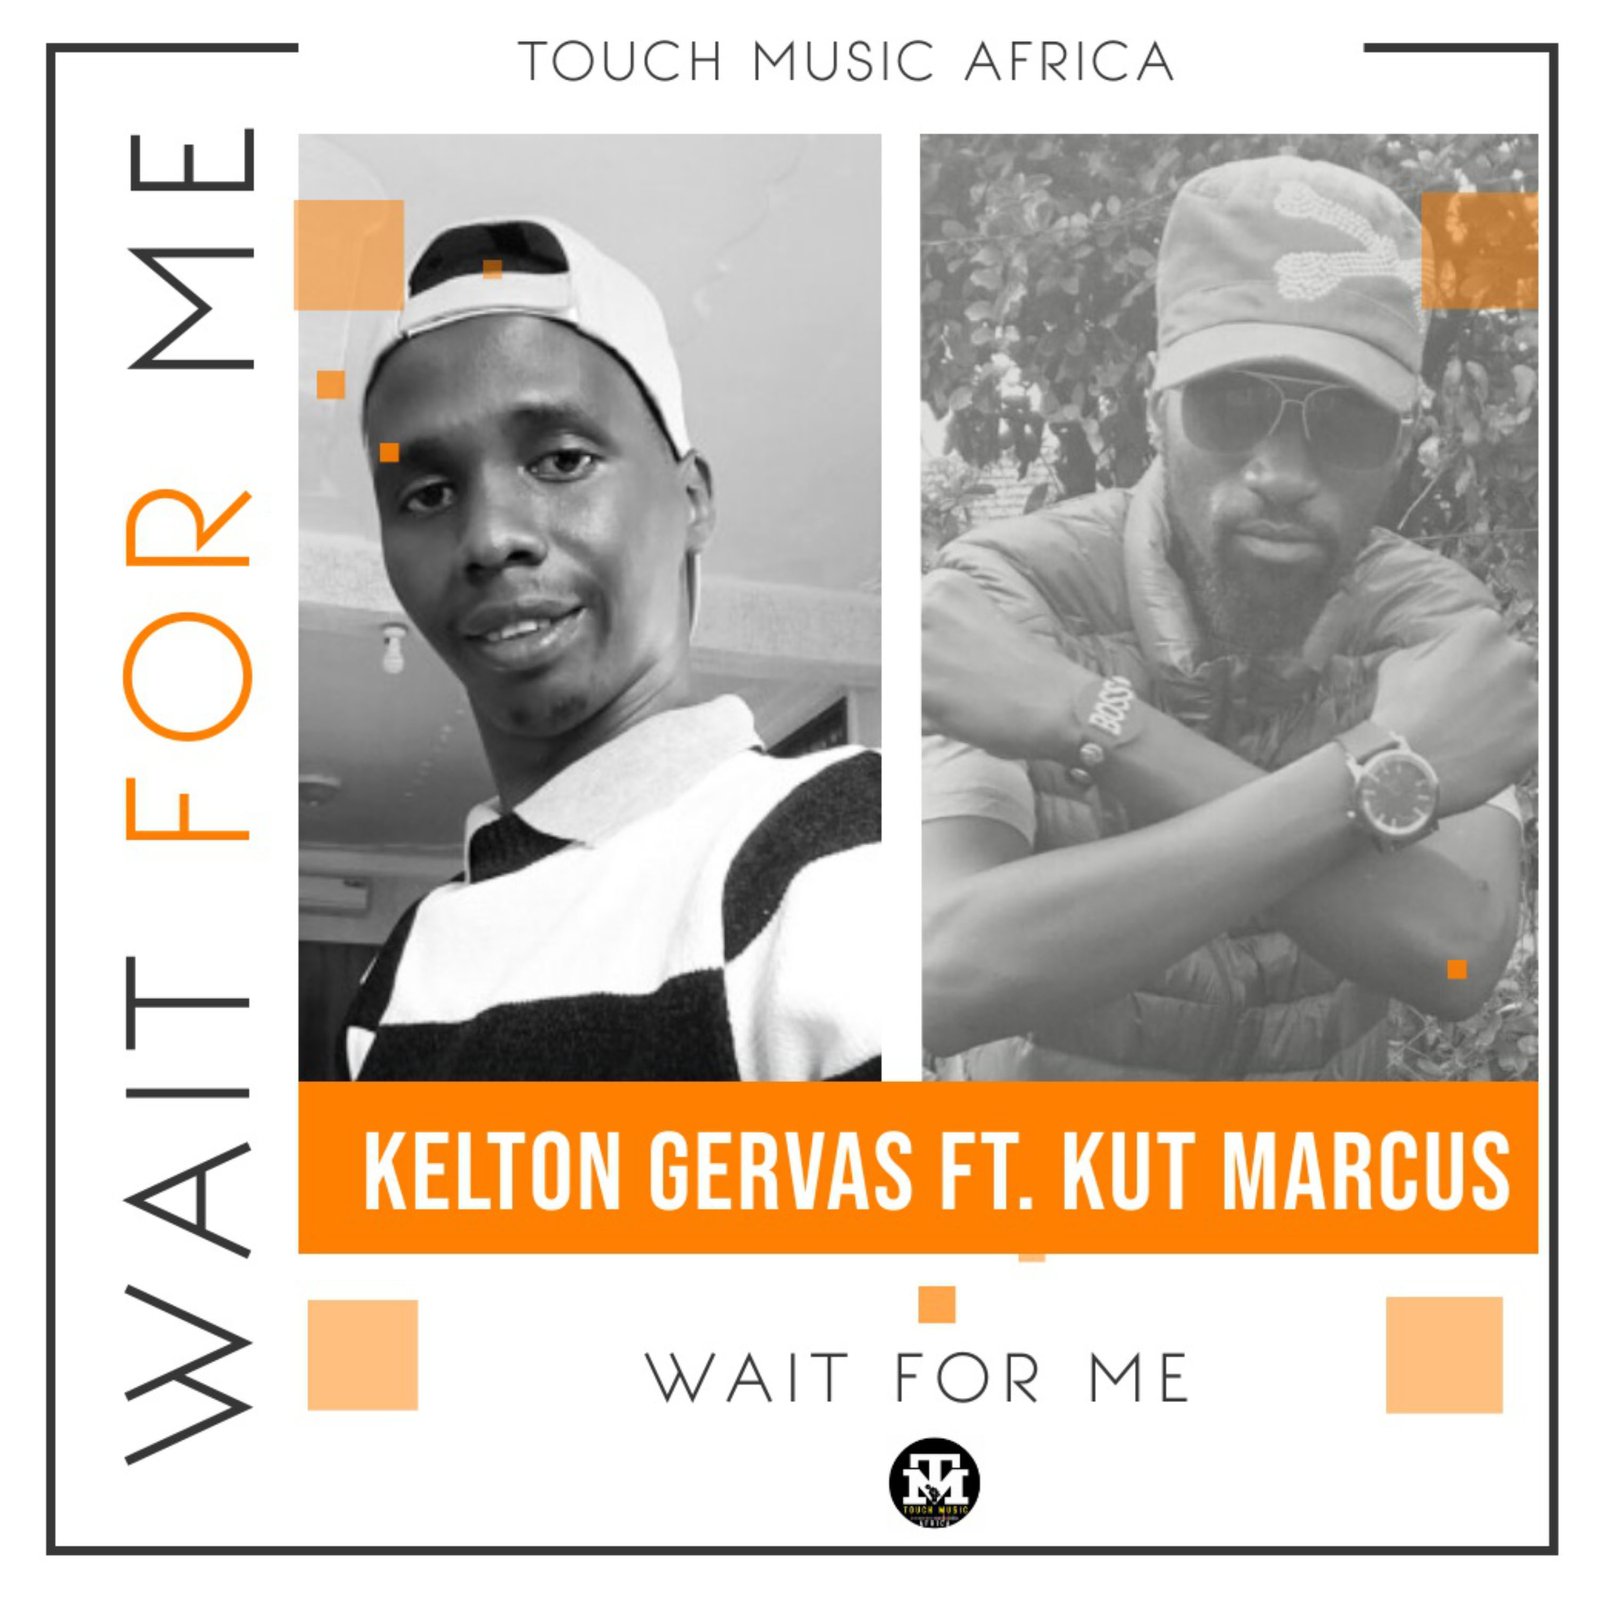 Kelton Gervas teams up with Teso’s Legendary Rapper Kut Marcus in a new song.